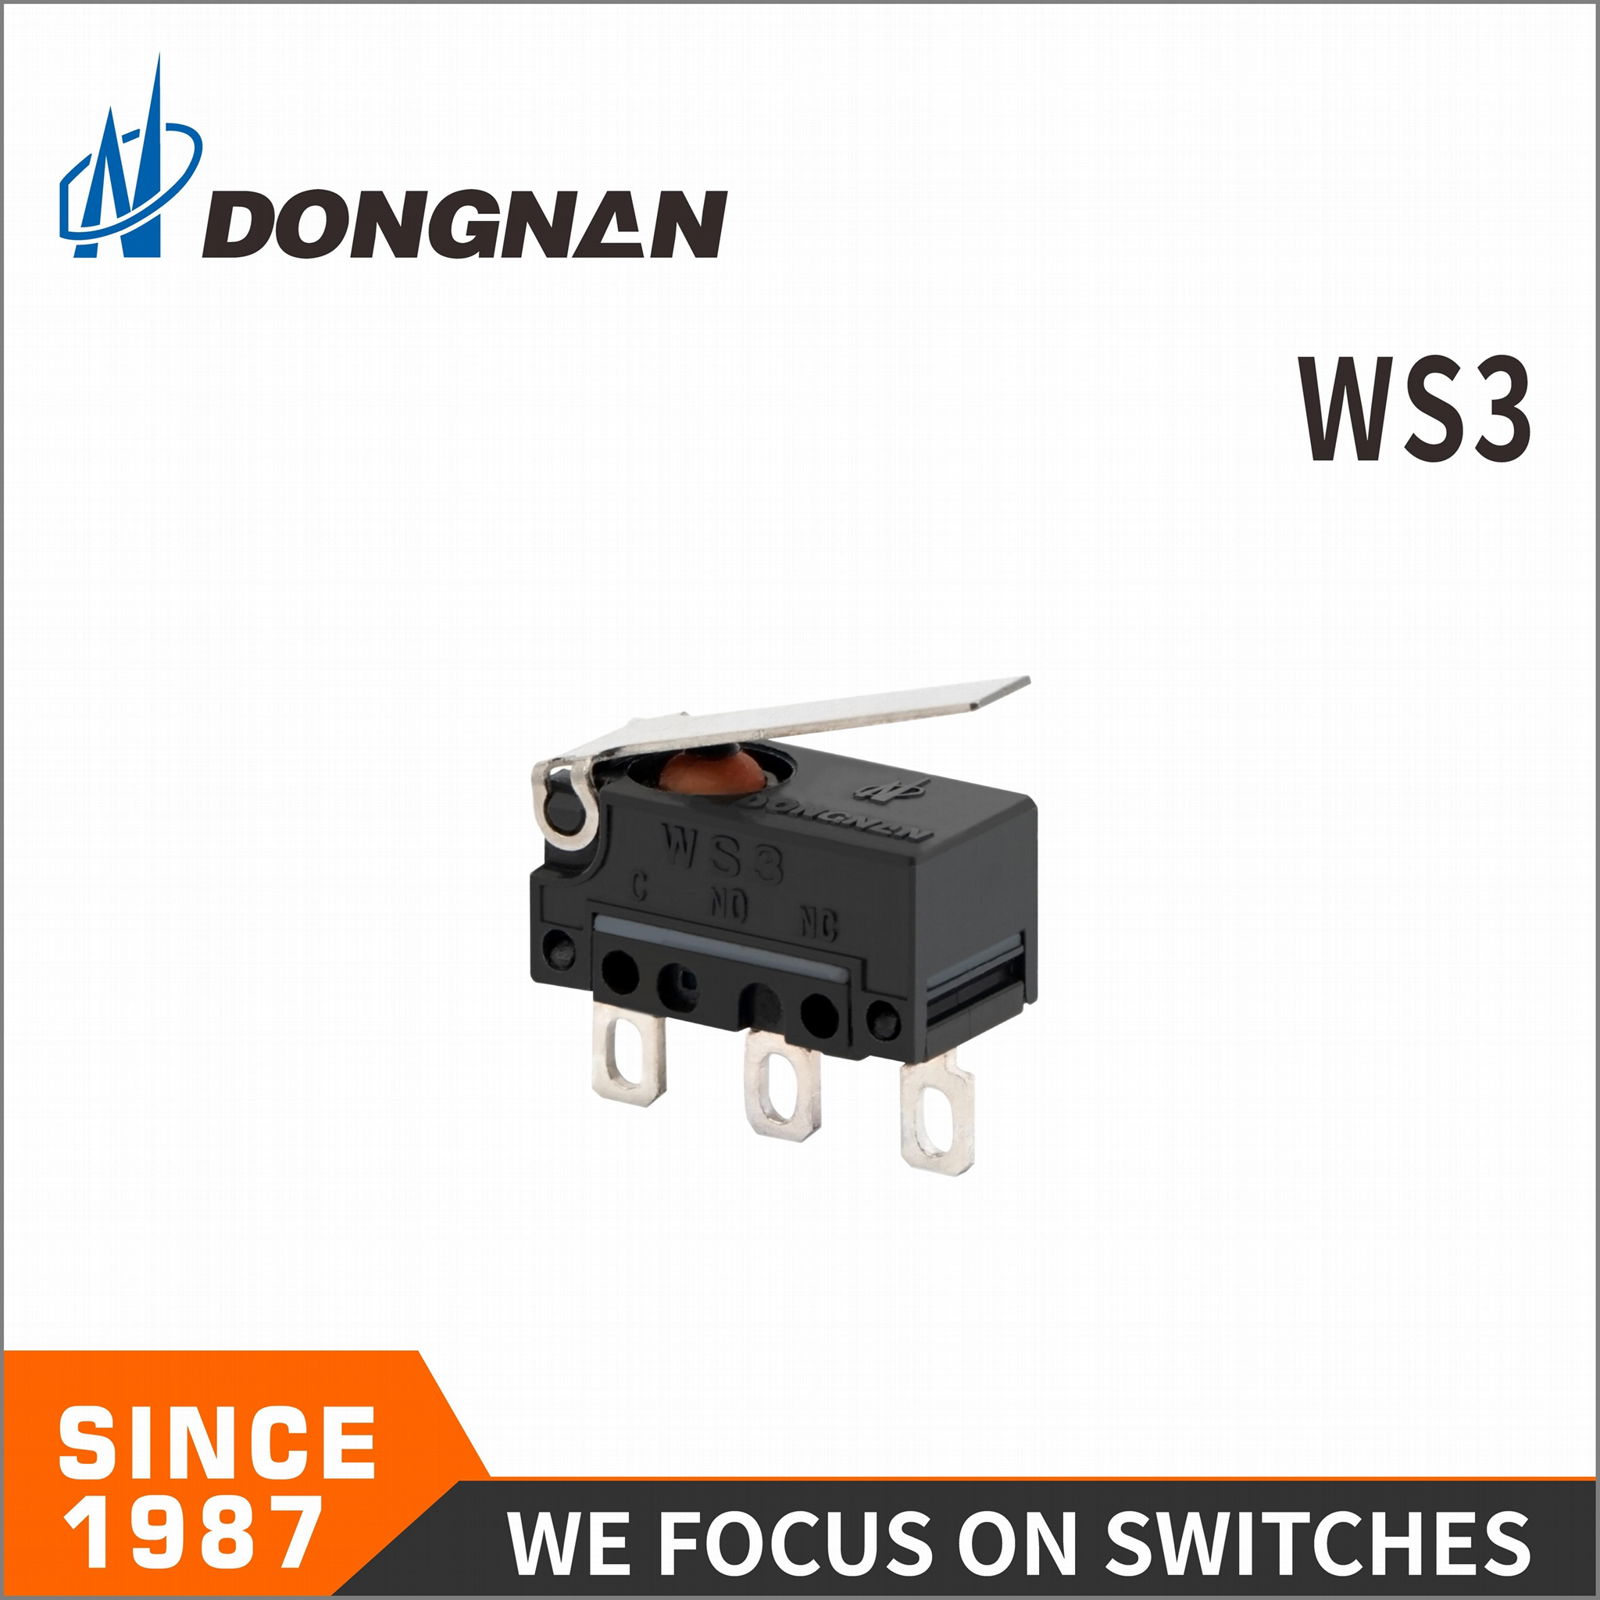 WS3 waterproof micro switch price purchase and distribution 2